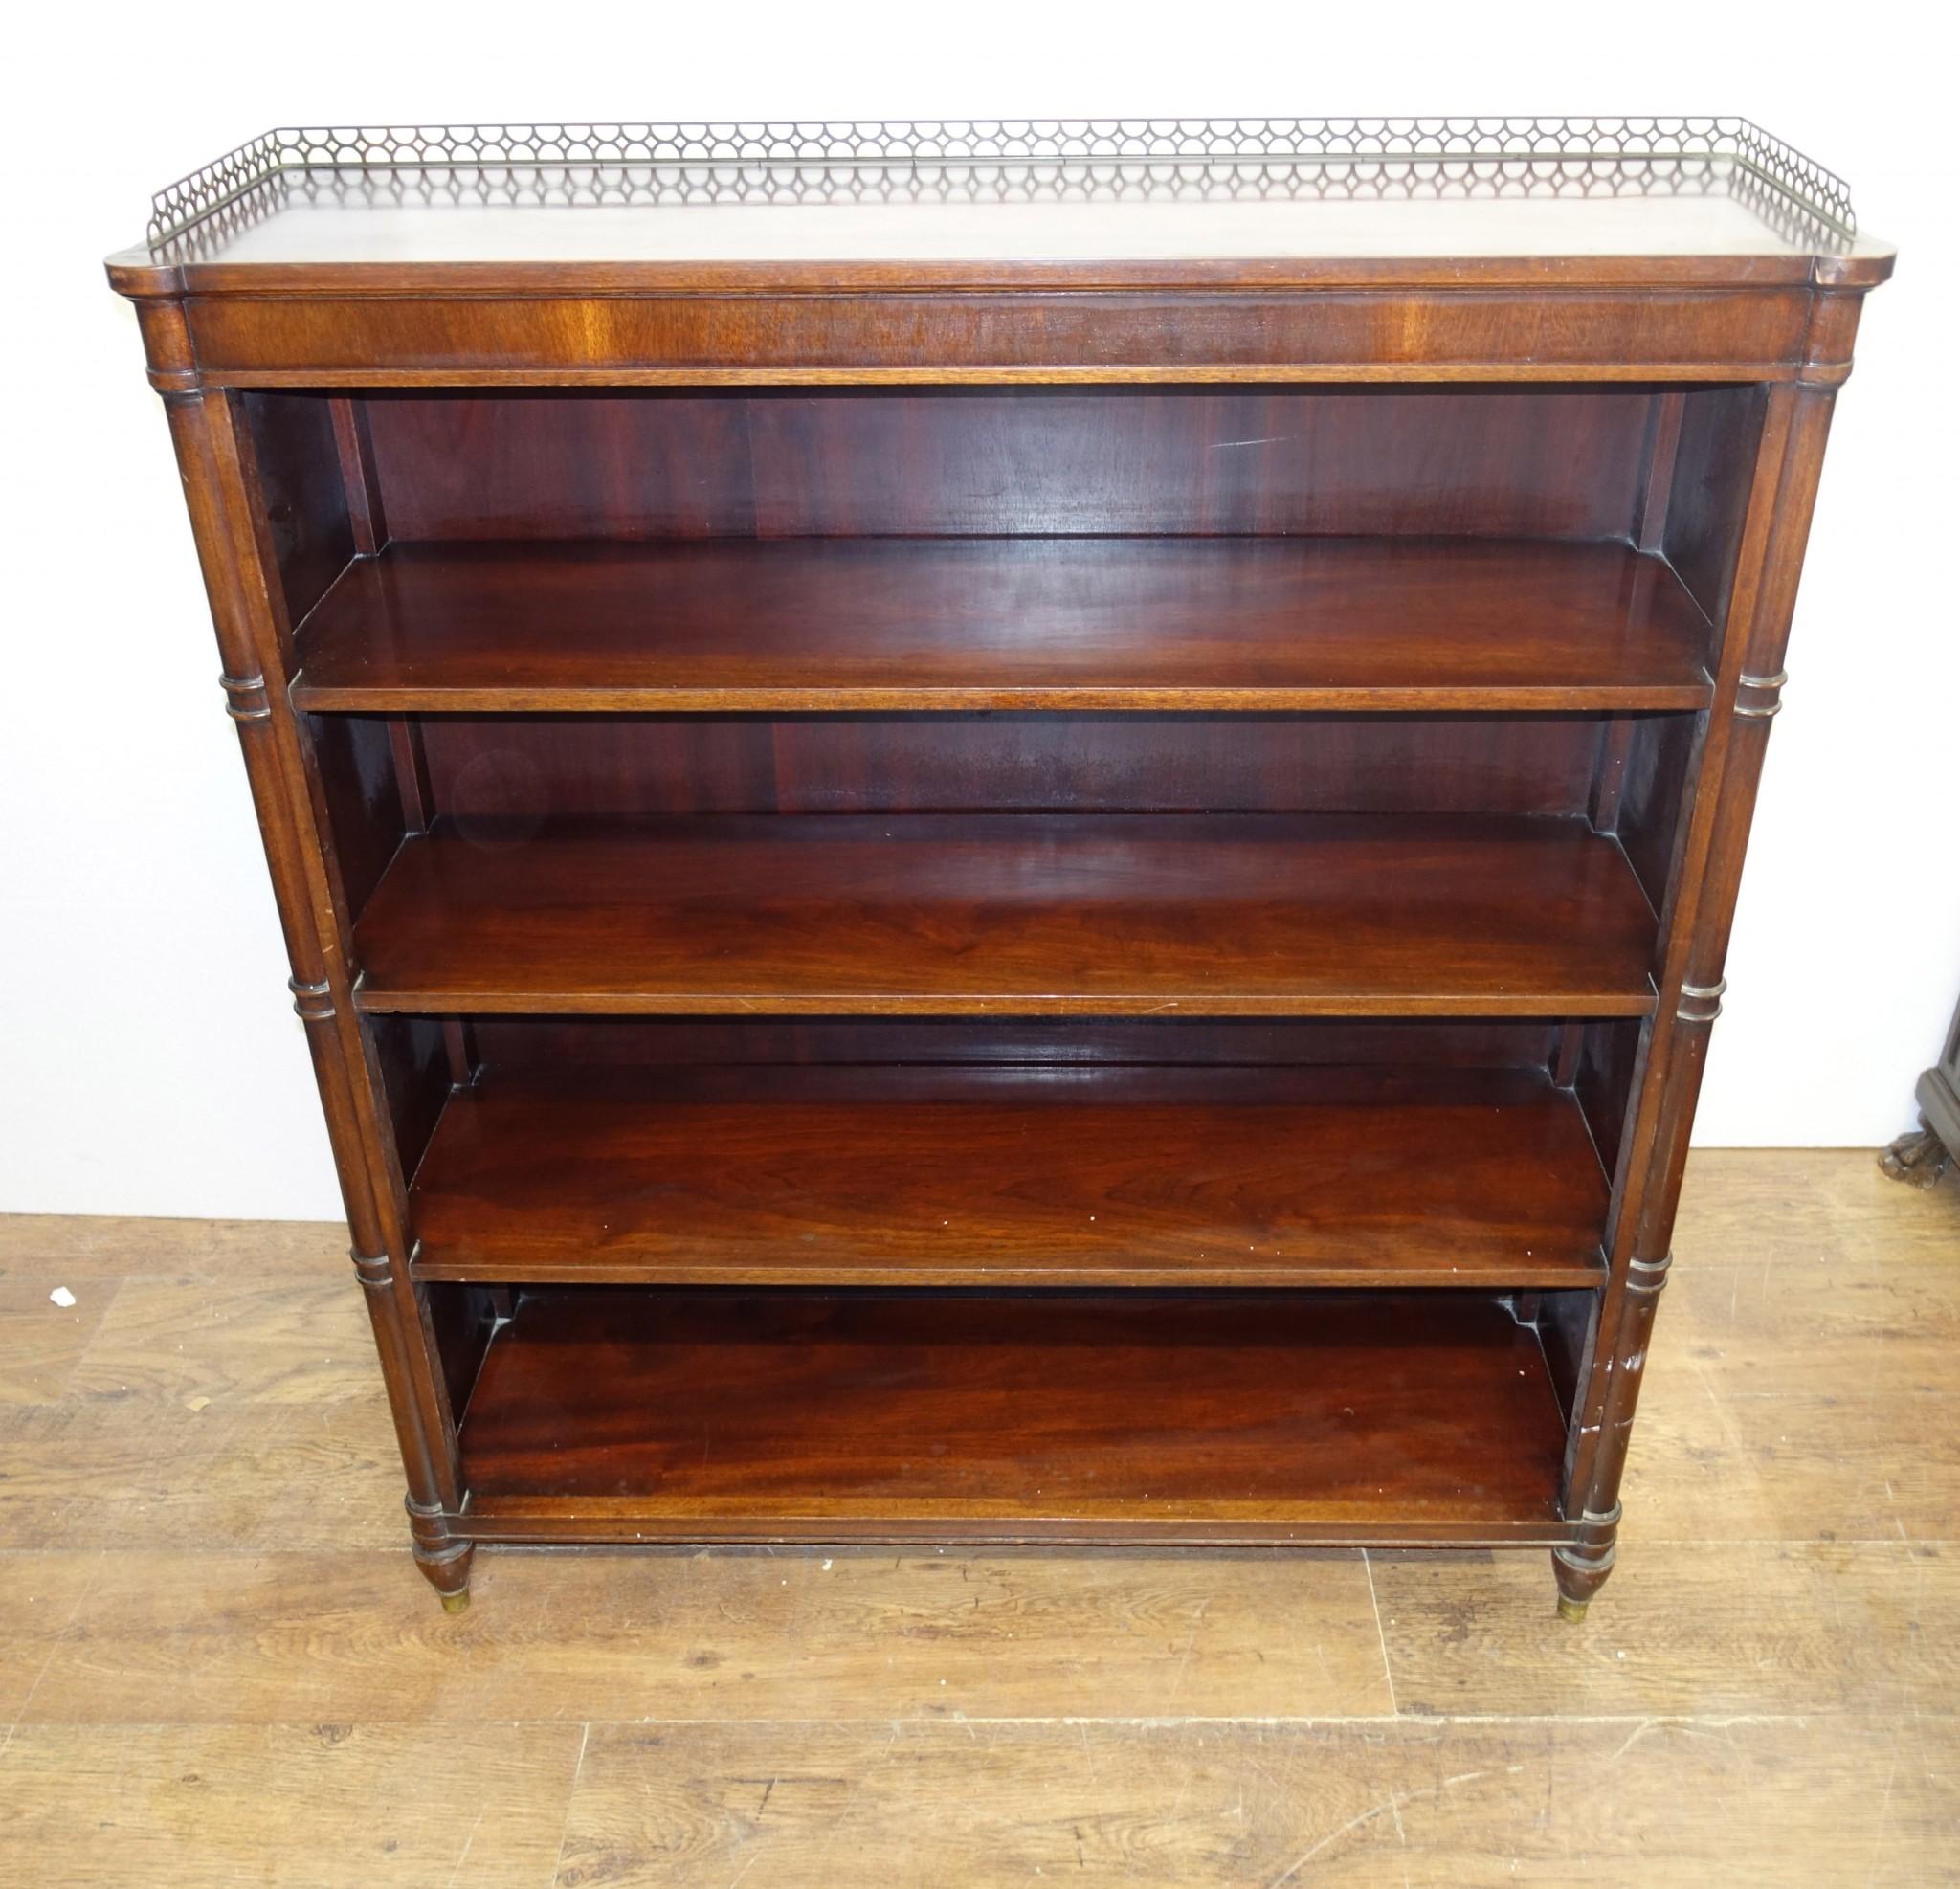 Gorgeous Regency Revival bookcase in mahogany
Features faux bamboo motifs to the front legs and column Four shelves so plenty of storage
Brass gallery to the top
Circa 1900 on this lovely piece of antique English furniture
Offered in great shape